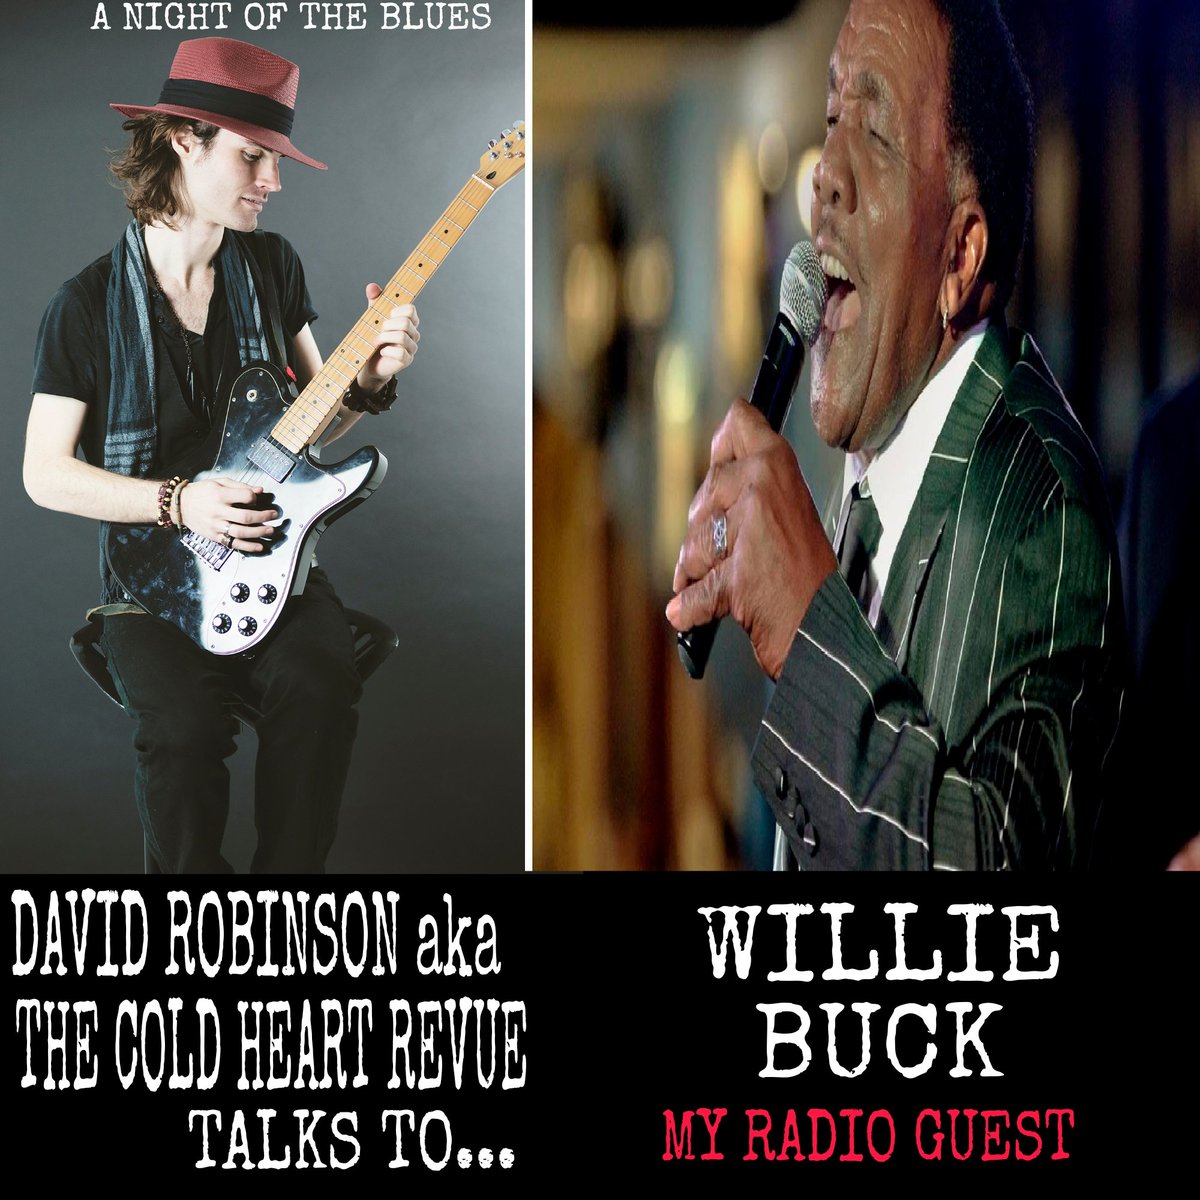 RADIO: my interview guest is Willie Buck. Born in 1936 - a masterful blues vocalist renowned for his work as a bandleader. He also worked with Howlin Wolf and Pinetop Perkins. David Robinson aka The Cold Heart Revue. A Night of the Blues. #blues #radio #music #singer #chicago